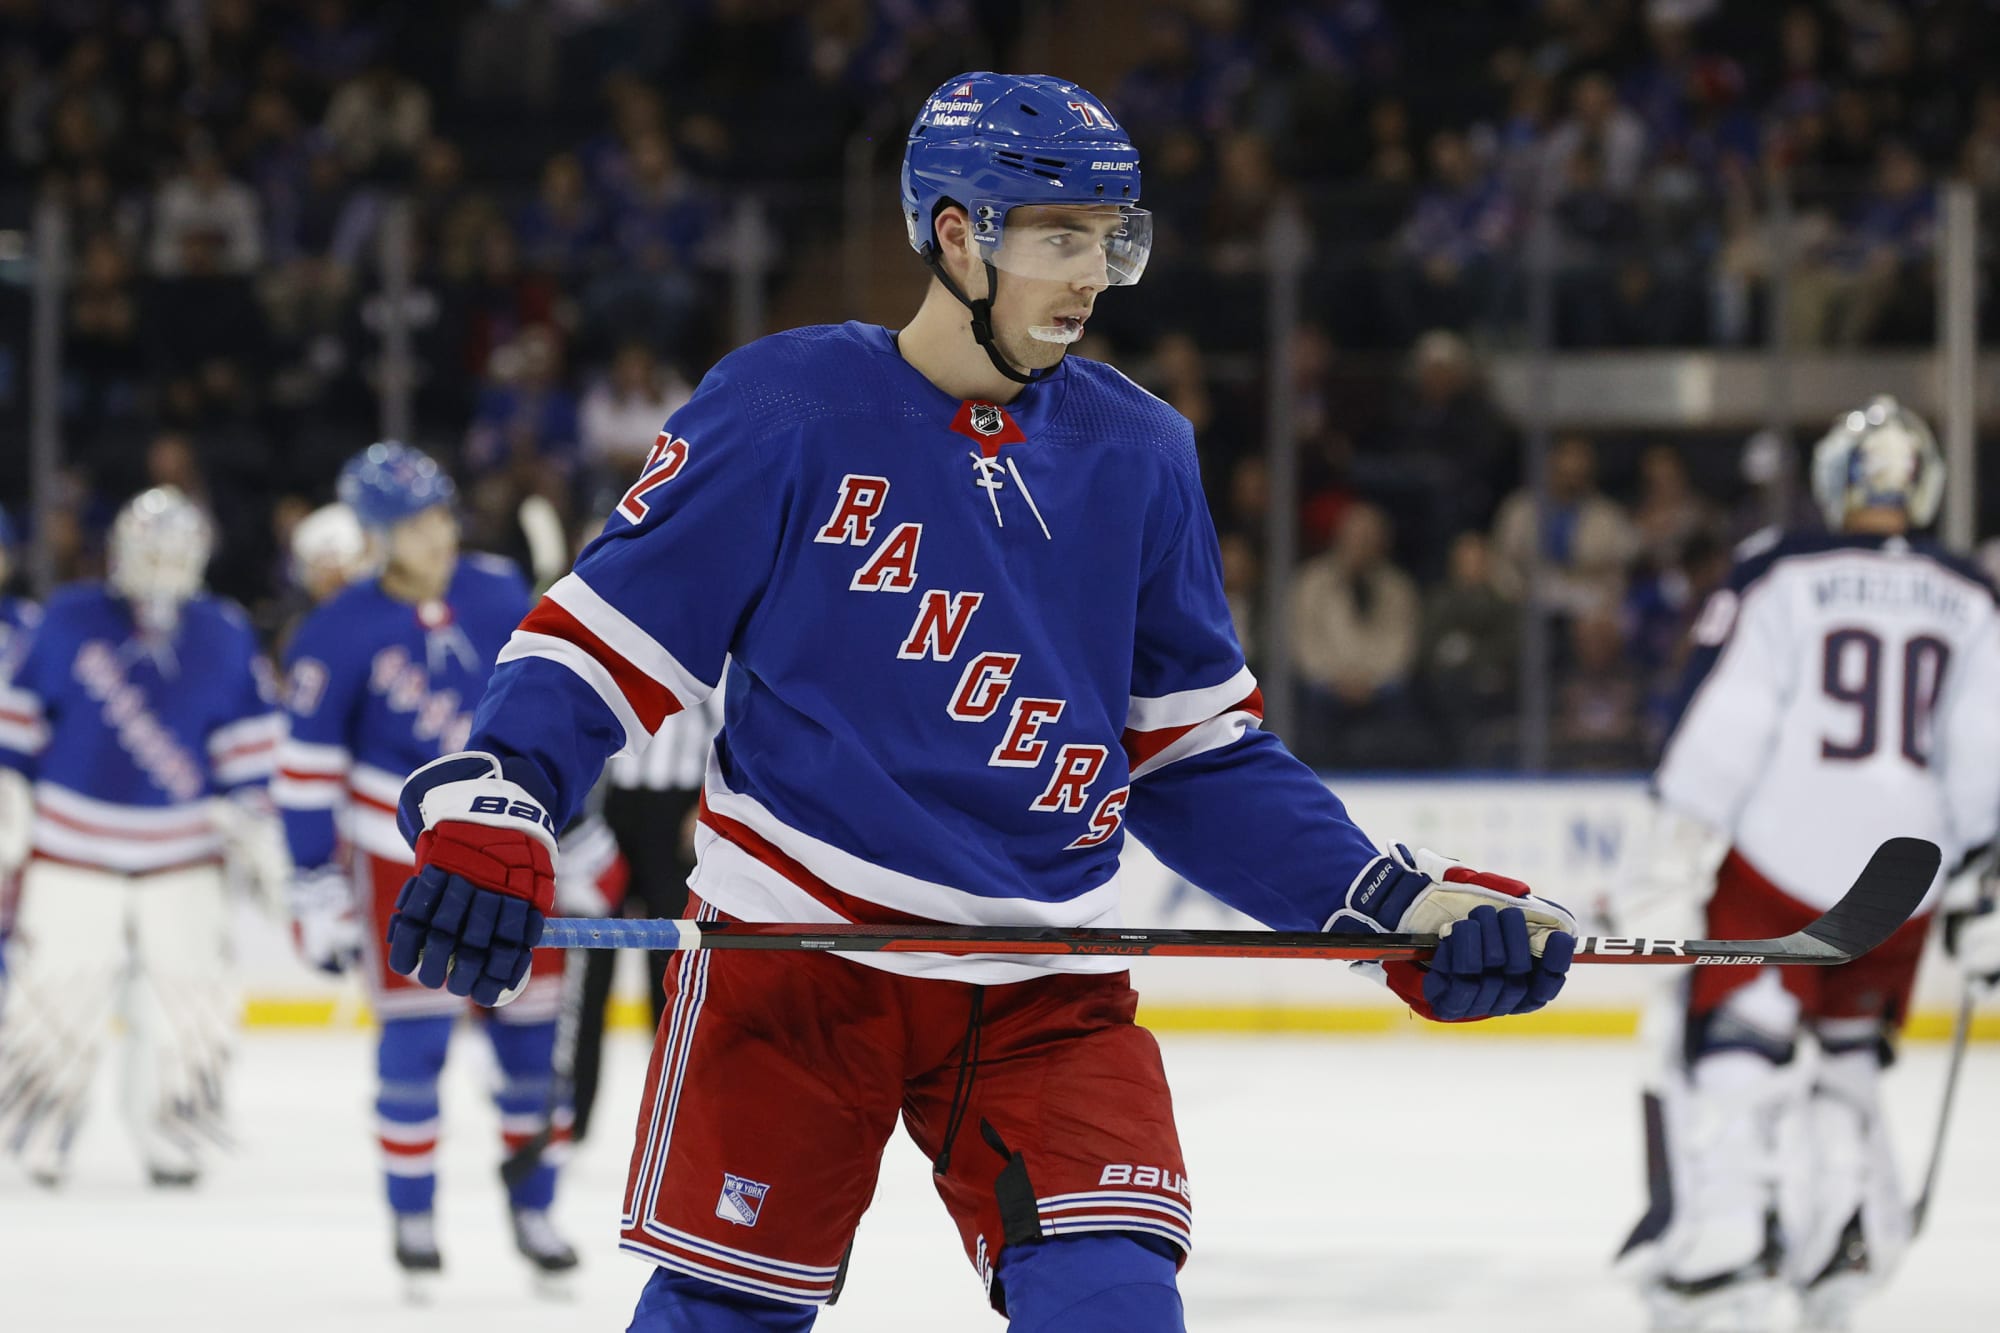 Rangers call up first-round picks Lias Andersson, Filip Chytil, who record  a goal and an assist, respectively in 4-2 loss – New York Daily News